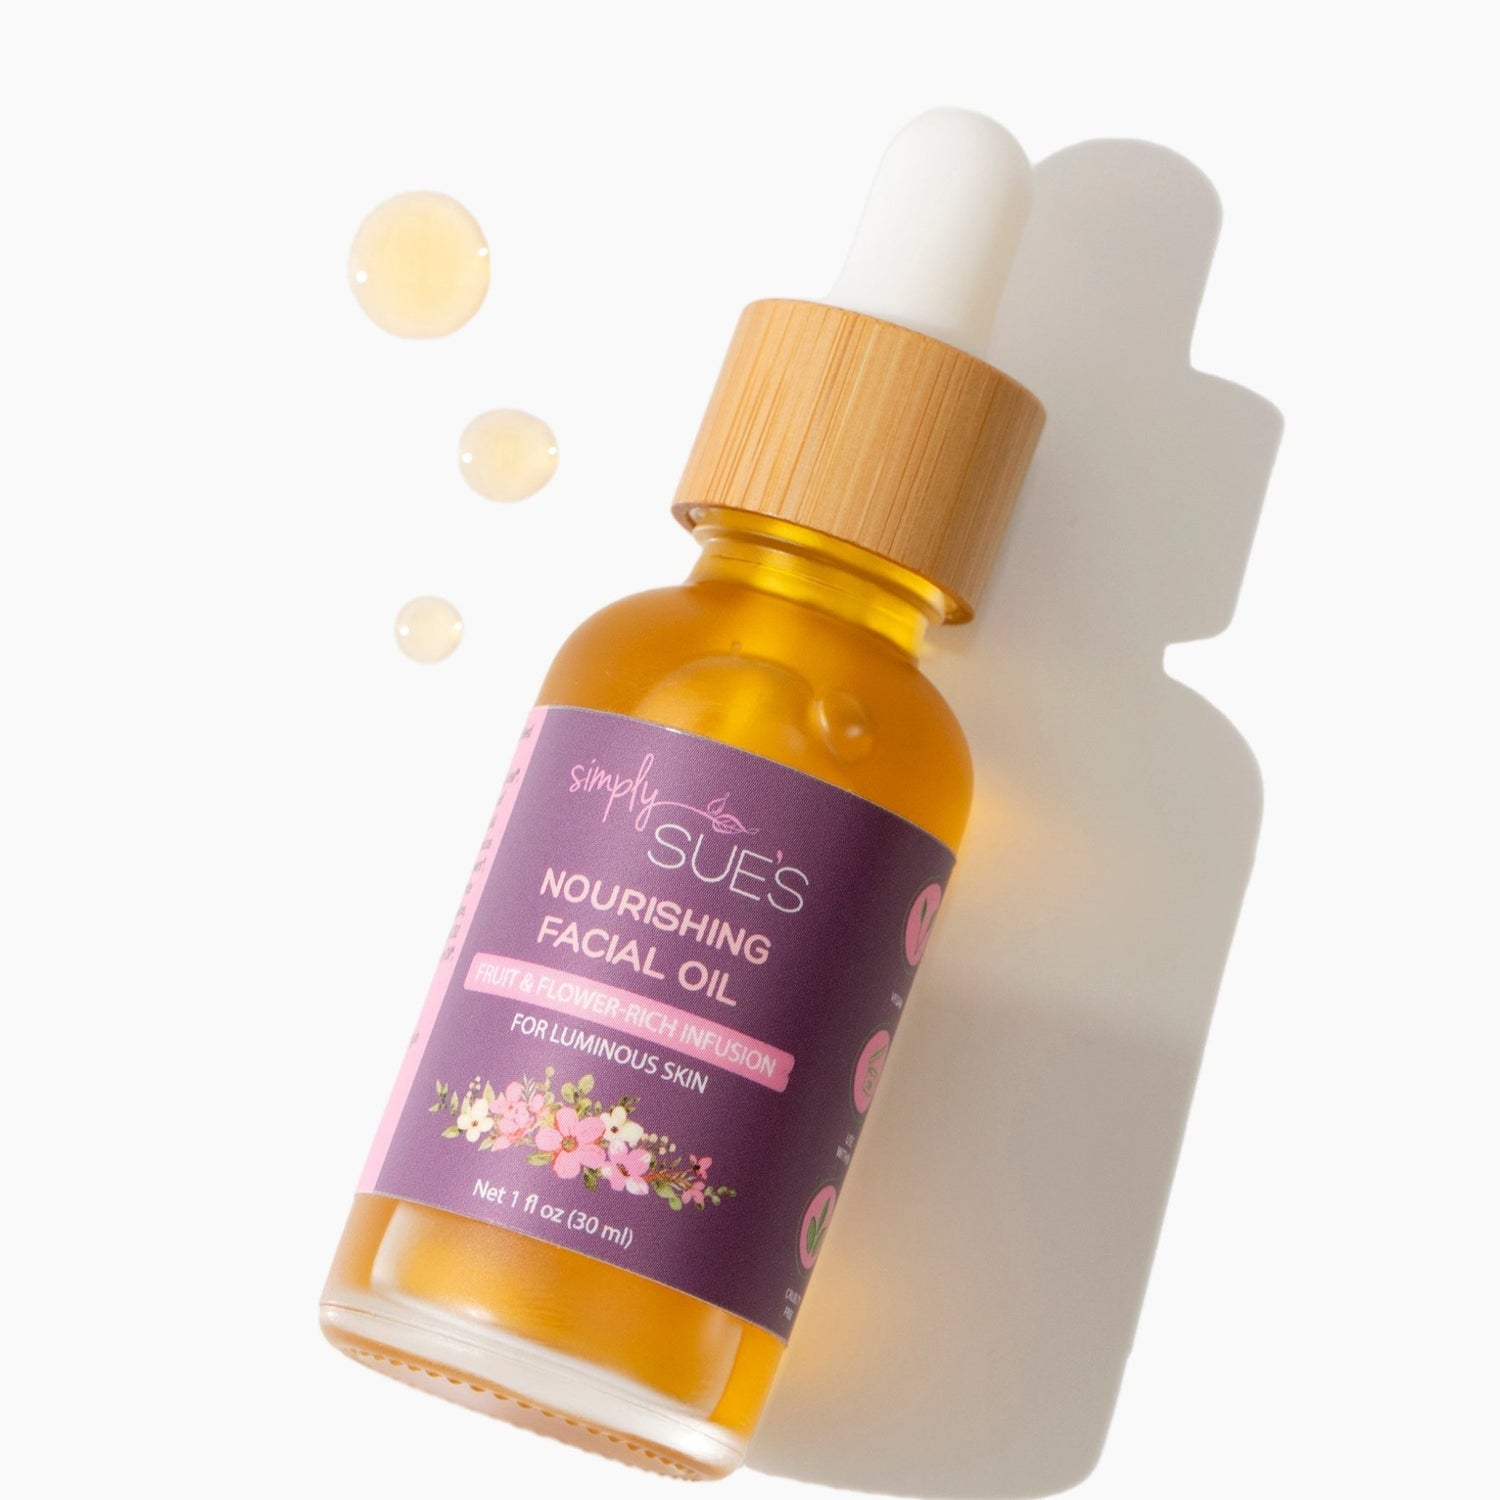 Moisturizing Face Oil from Simply Sue&